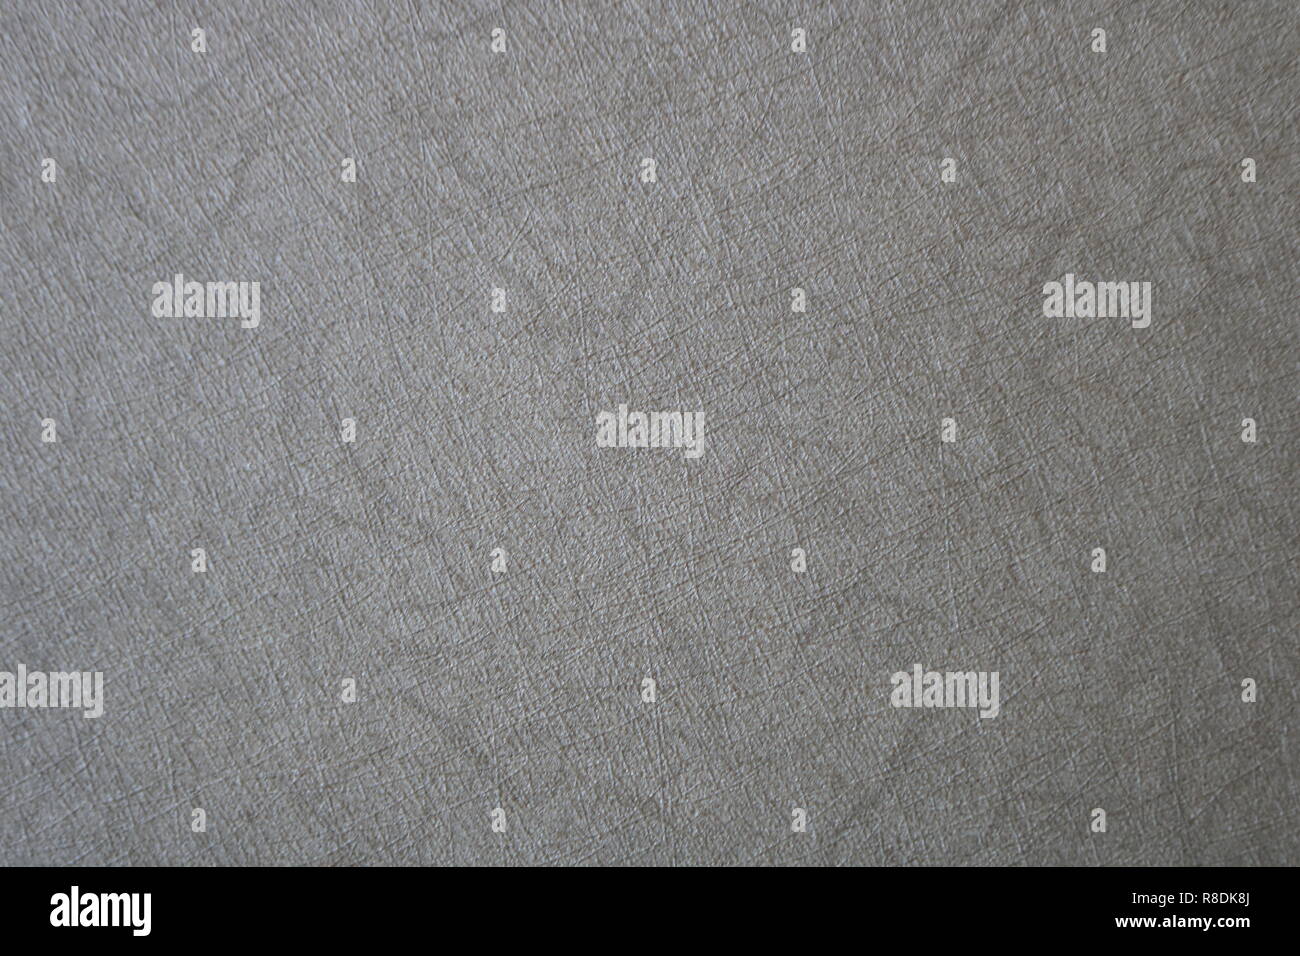 Close up image of abstract wallpaper texture, grey grunge design Stock Photo